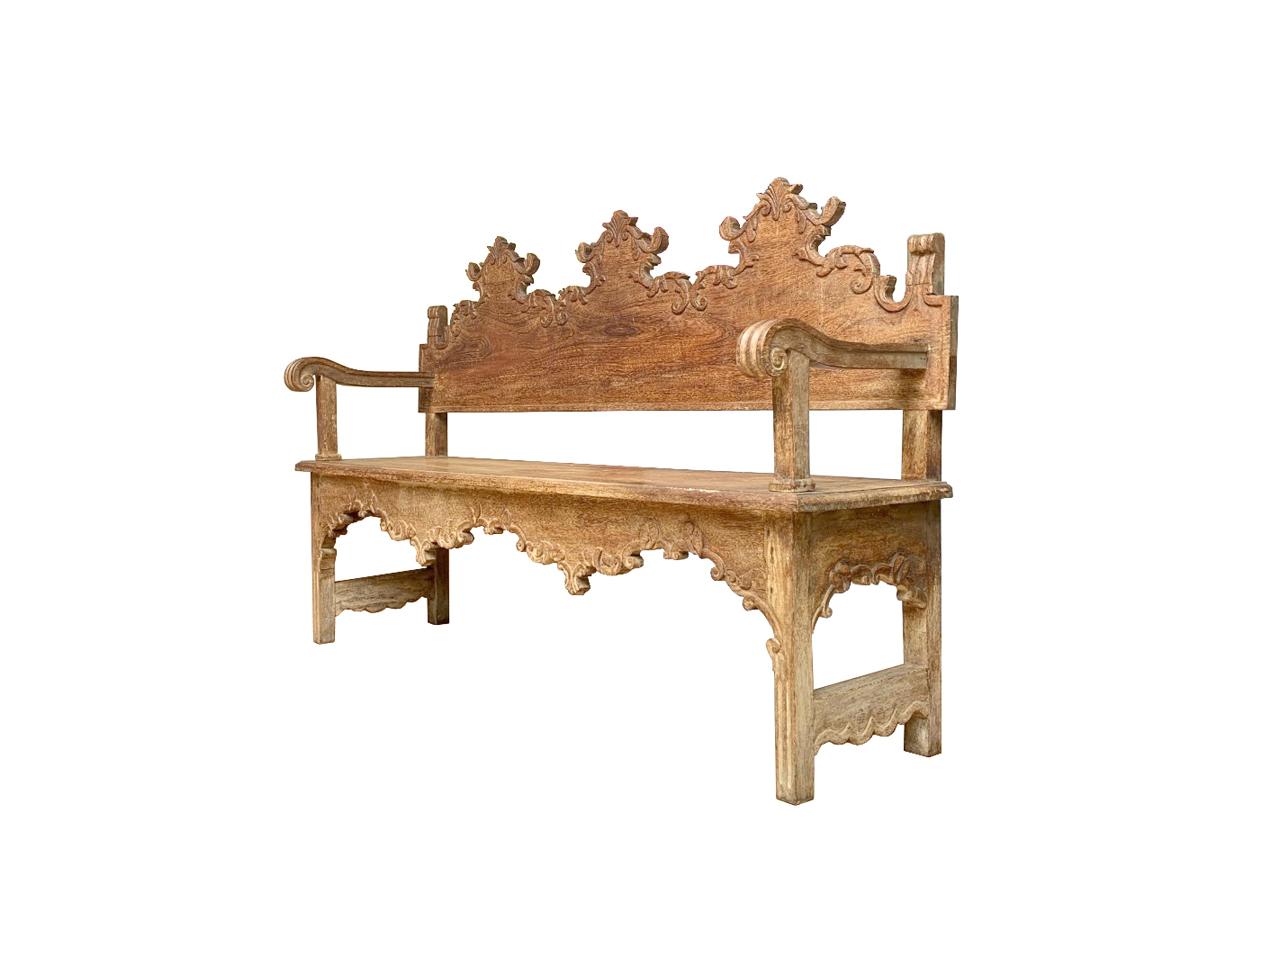 Spanish Colonial Revival Hall Bench - Circa 1930 - Solid Hand Carved Sucupira 3600Wood 

Spanish Colonial Revival Hall Bench - Circa 1930 
Solid Hand Carved Wood, lots of details !
Gorgeous and unique artistic piece of furniture from the 30's. 
We